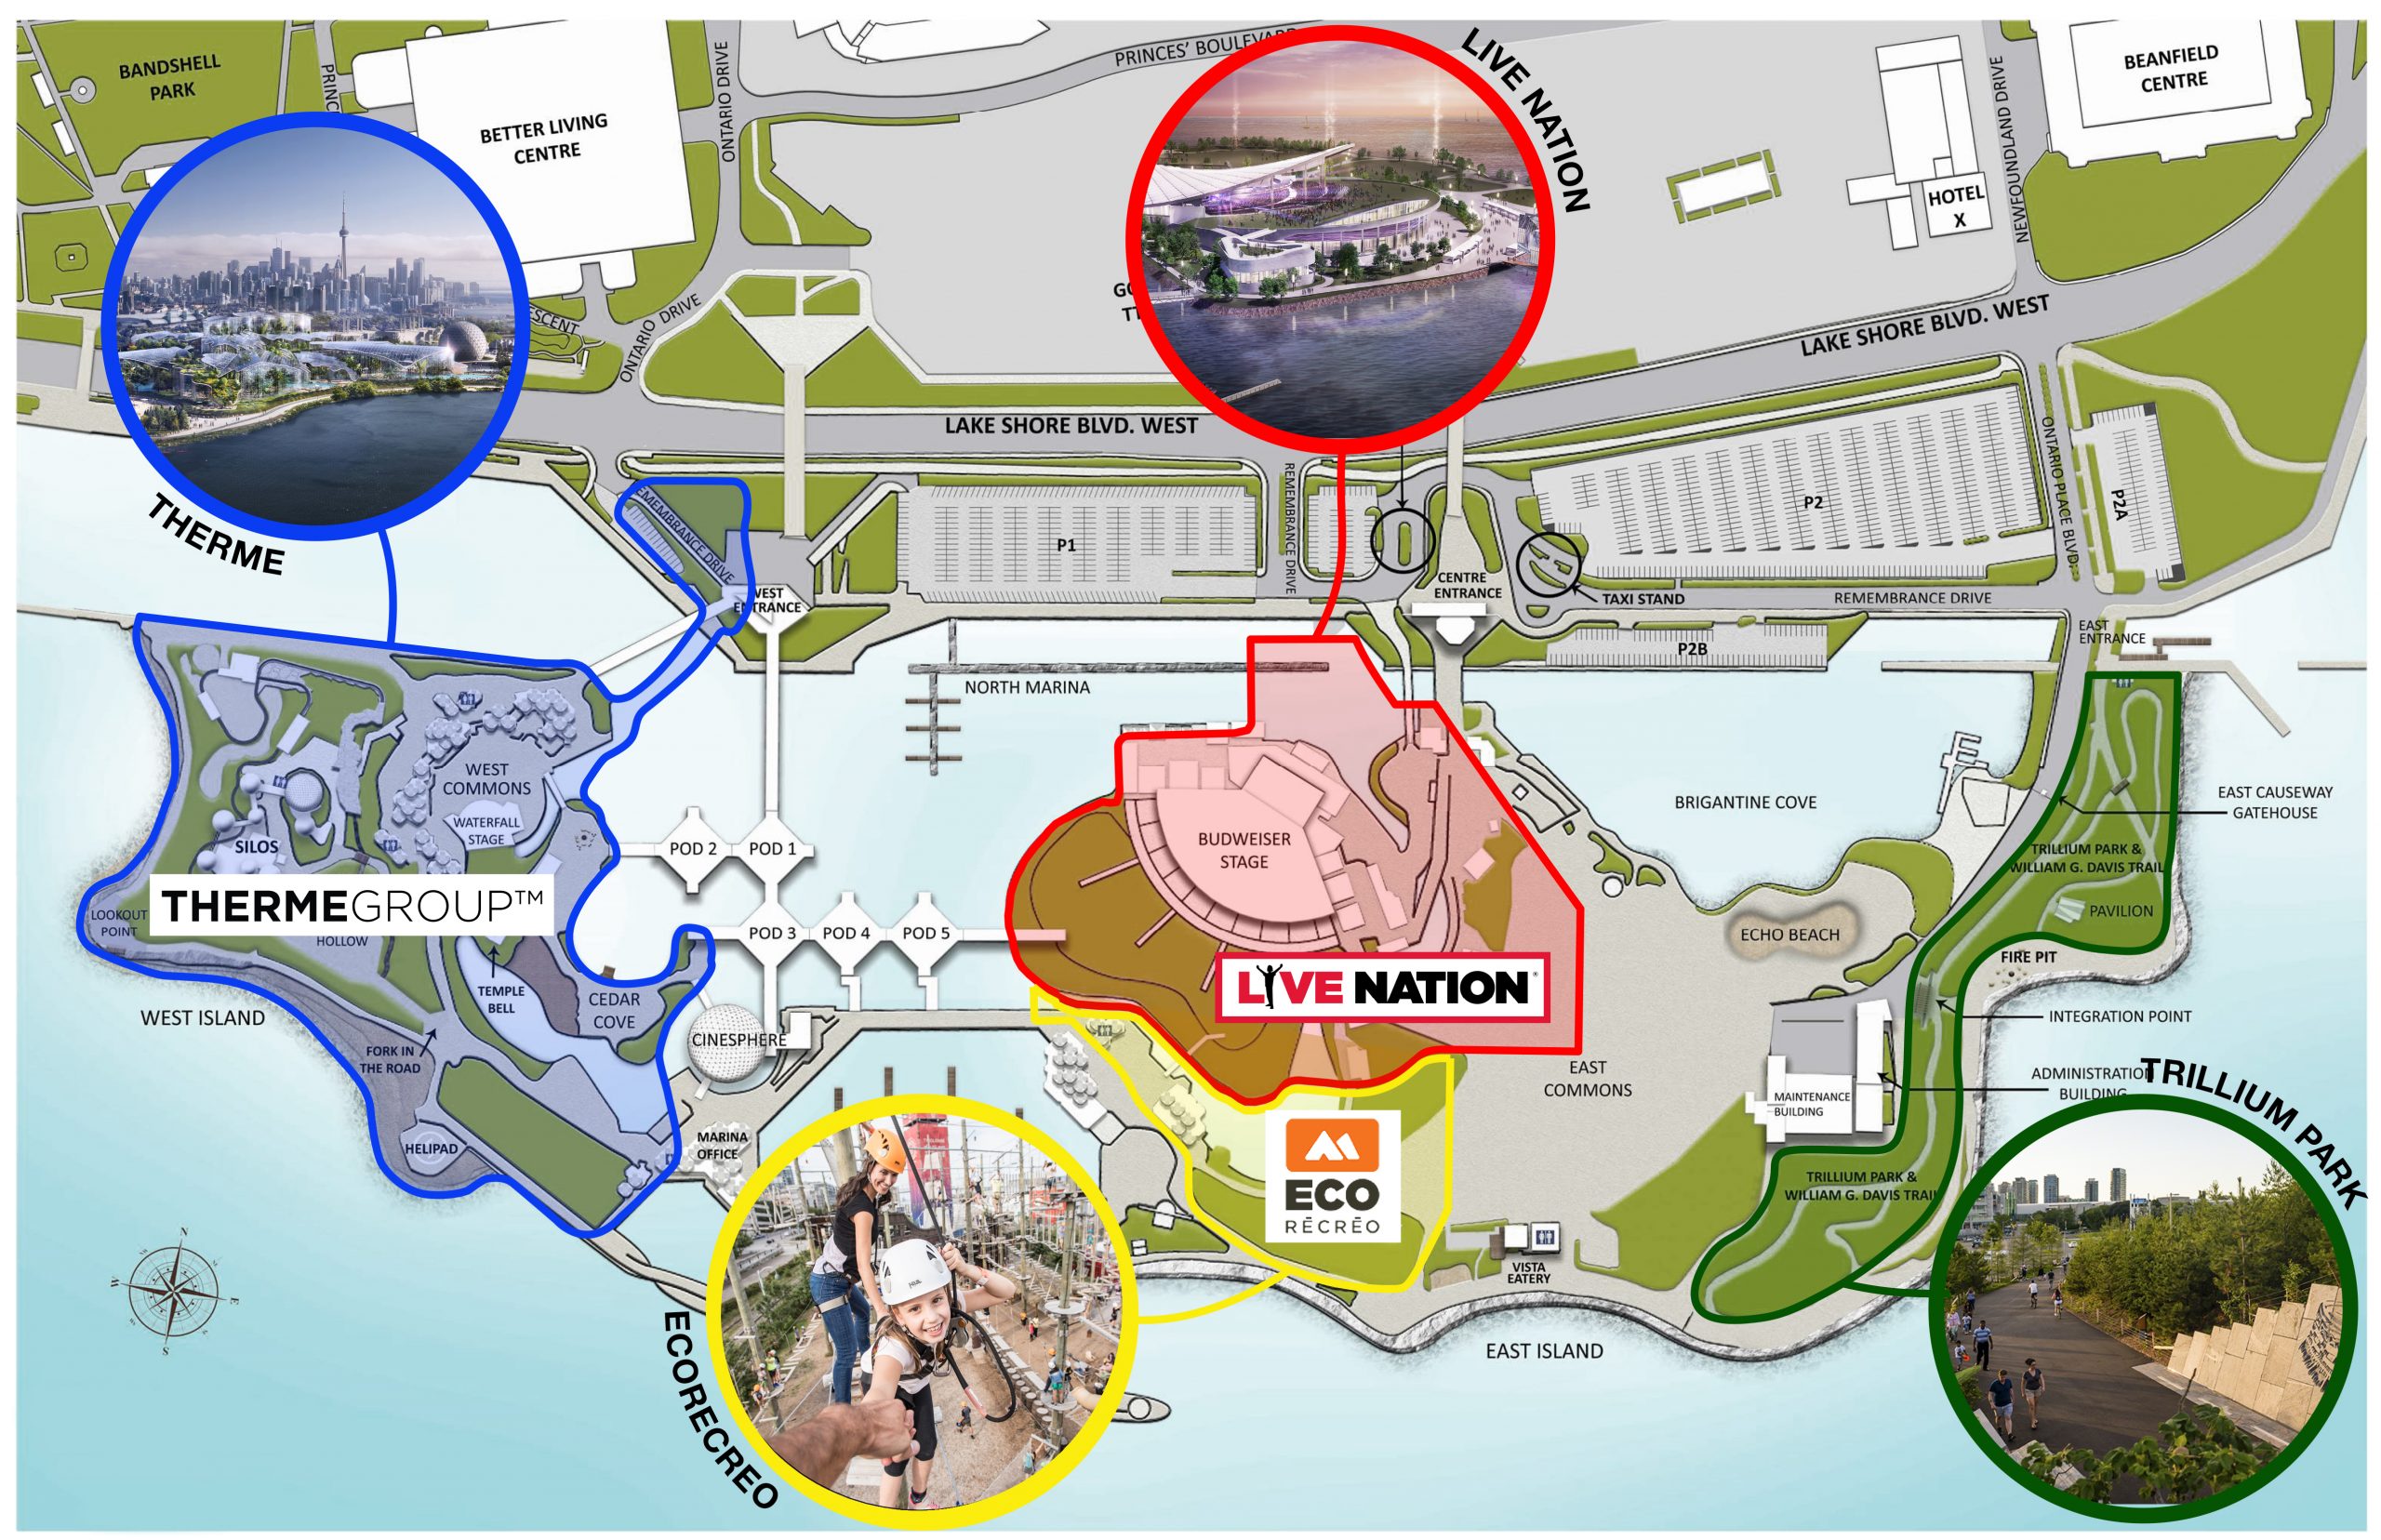 Ontario Place Redevelopment Map